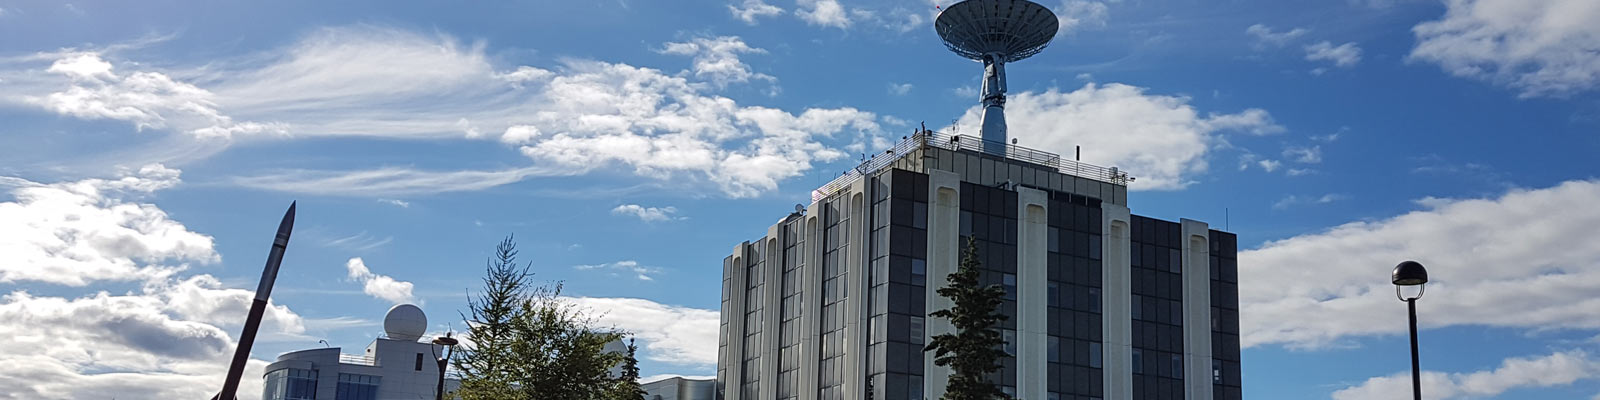 This is an image of the University of Alaska campus in Fairbanks. ASTA-USA provides professional translation services in this city.